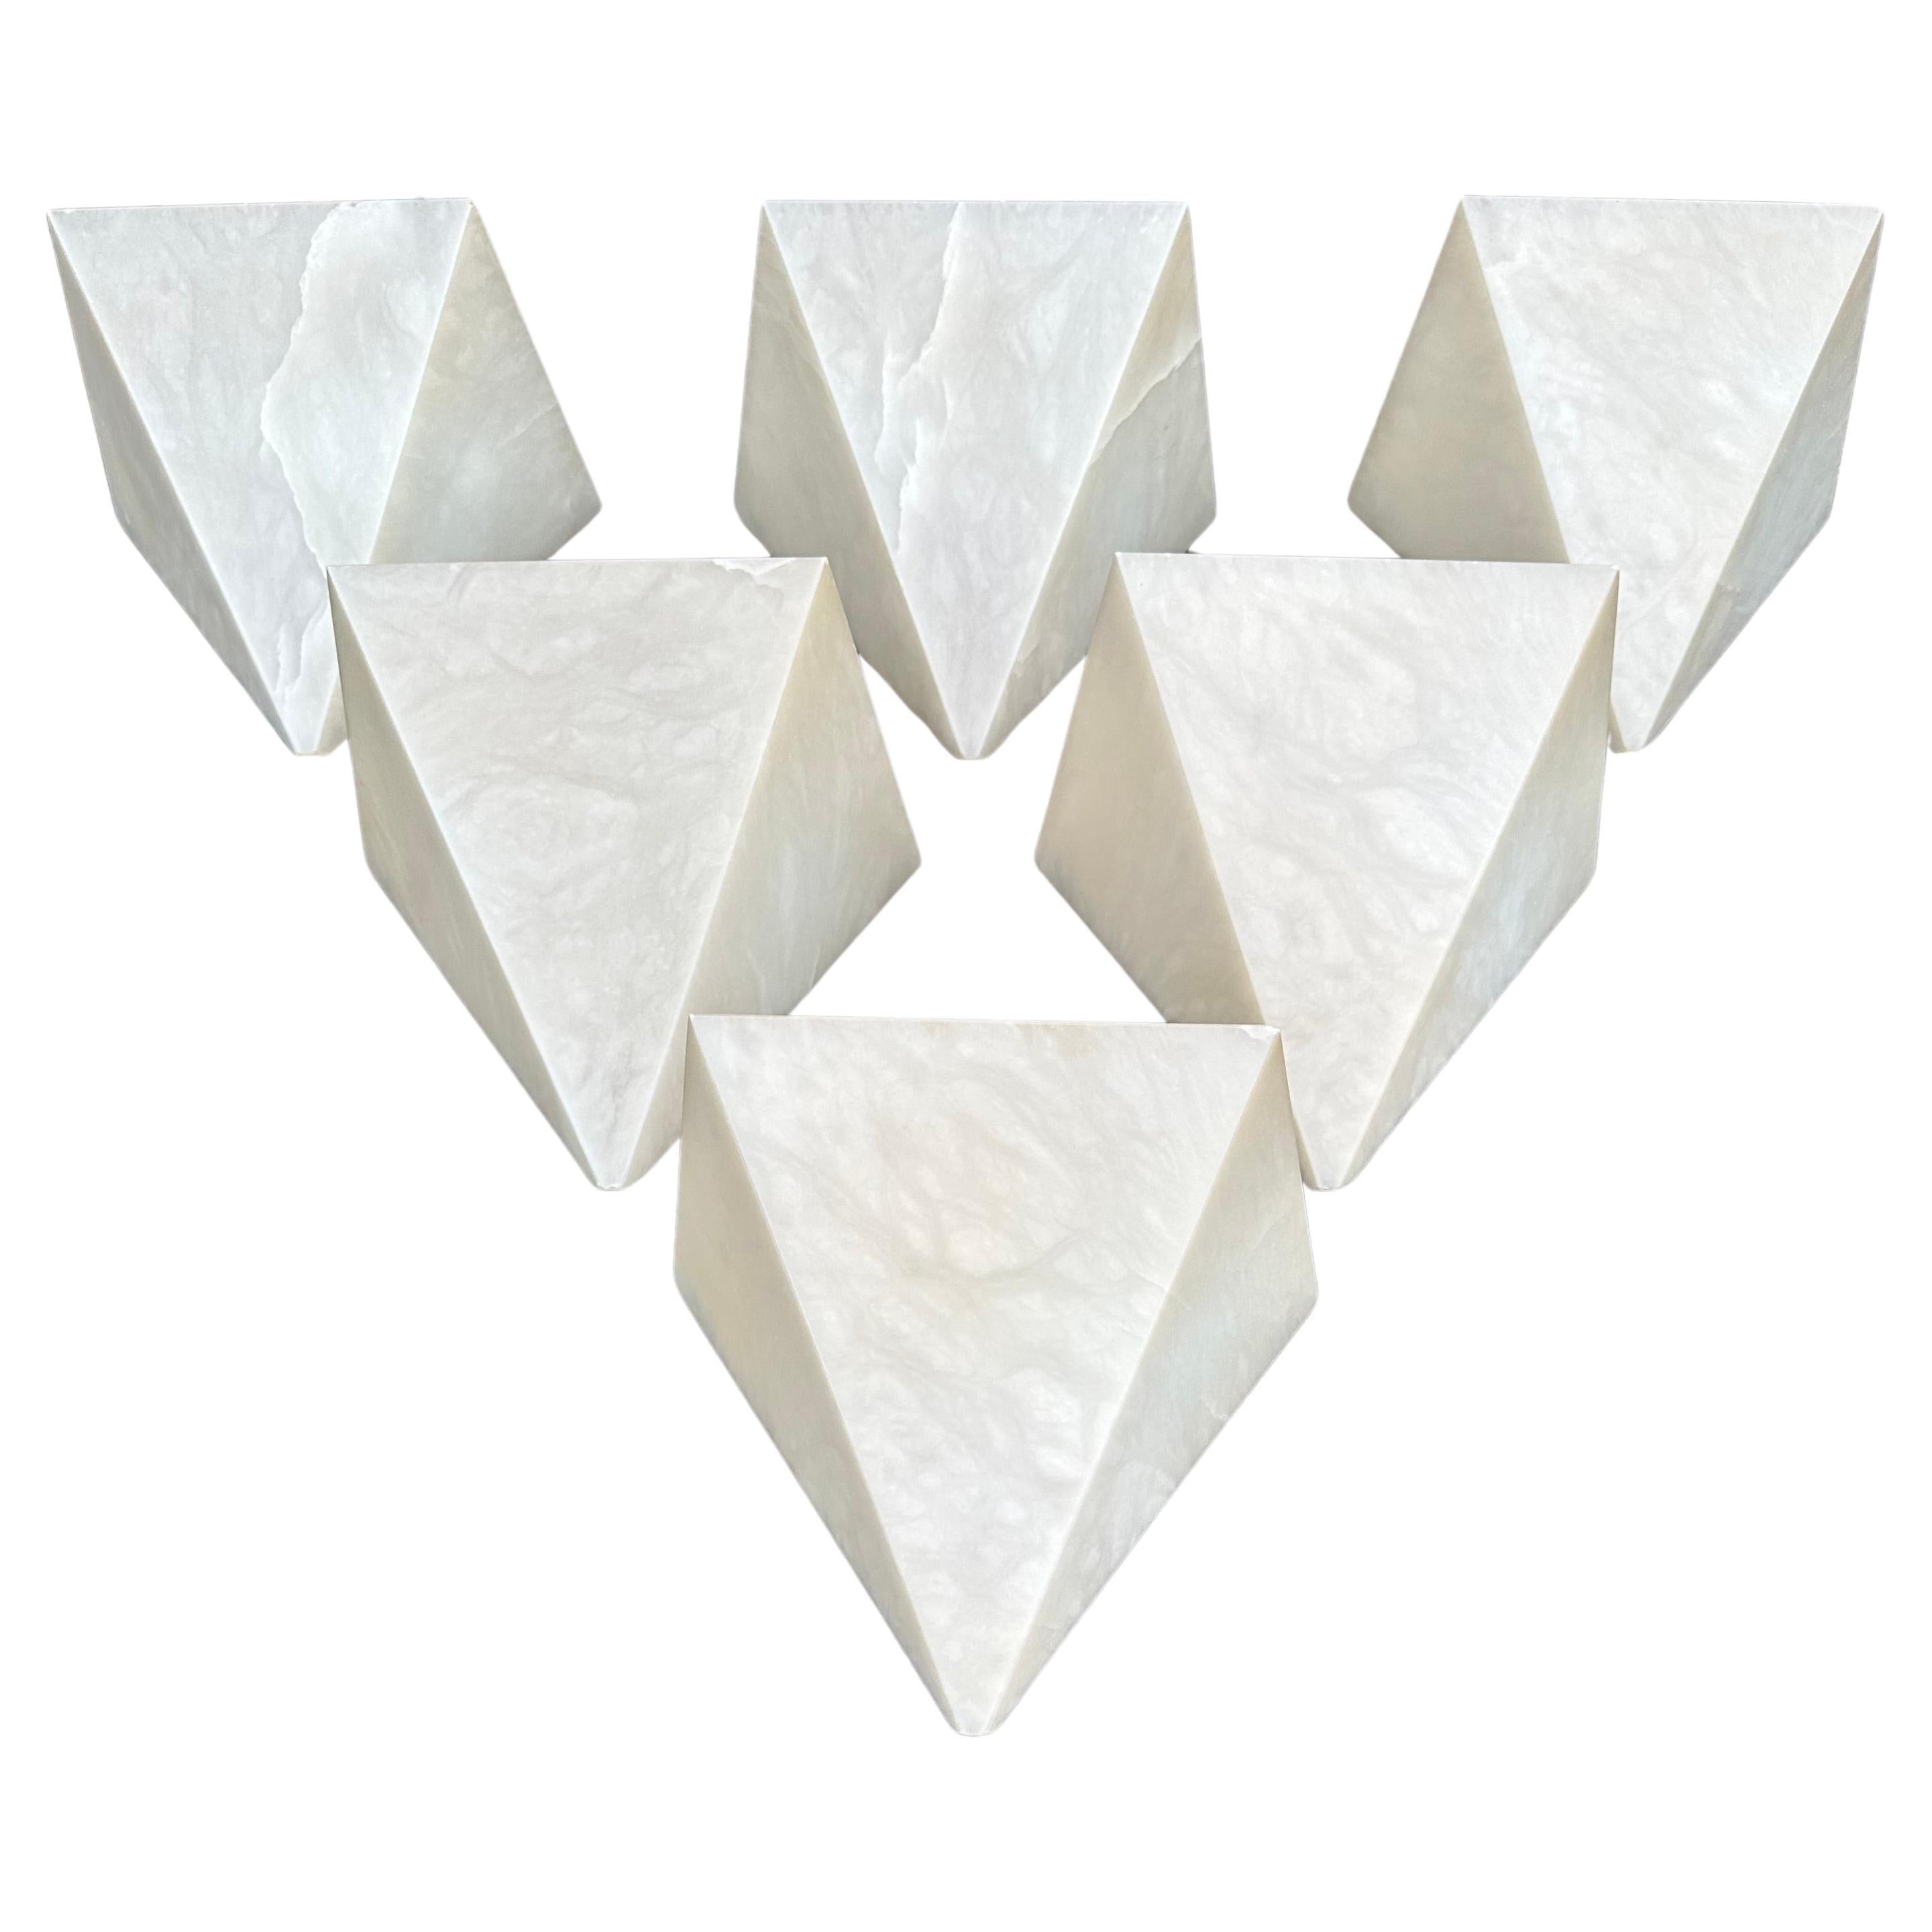 Six Outstanding Art Deco Top Design, Alabaster Wall Sconces Fixtures, Wall Lamps For Sale